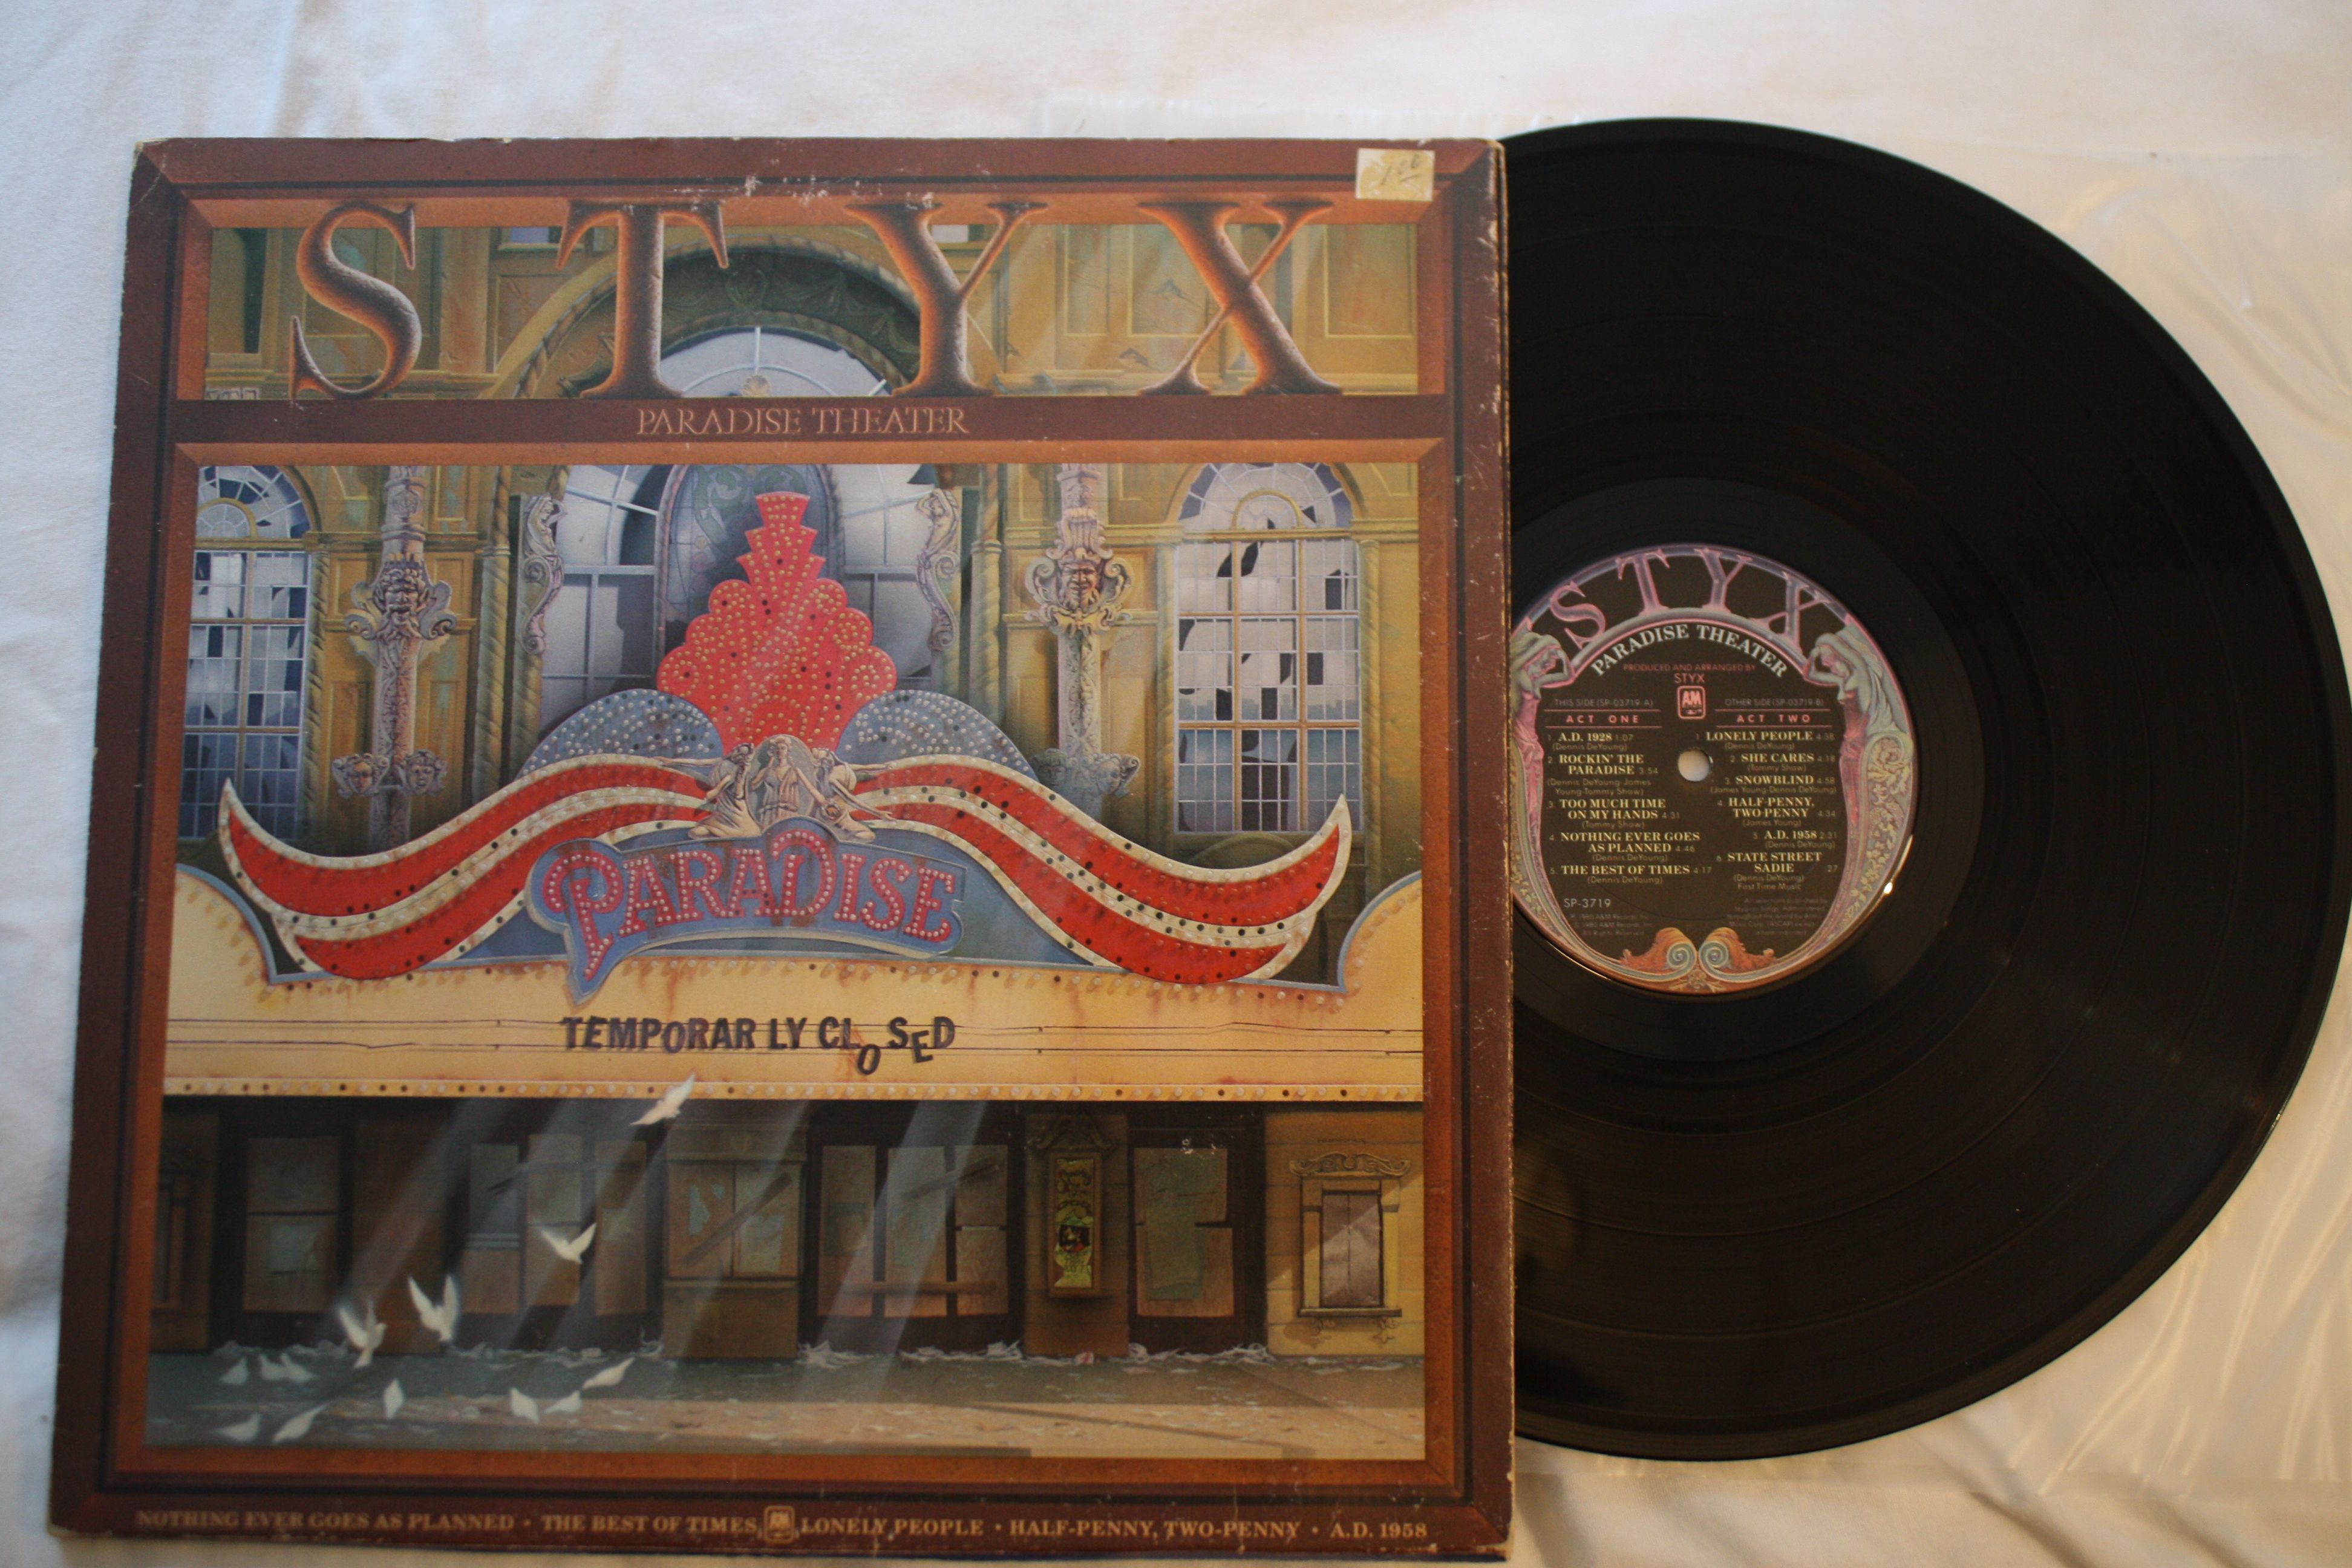 Record Rack' Steembay Auction: Styx "Paradise Theater.